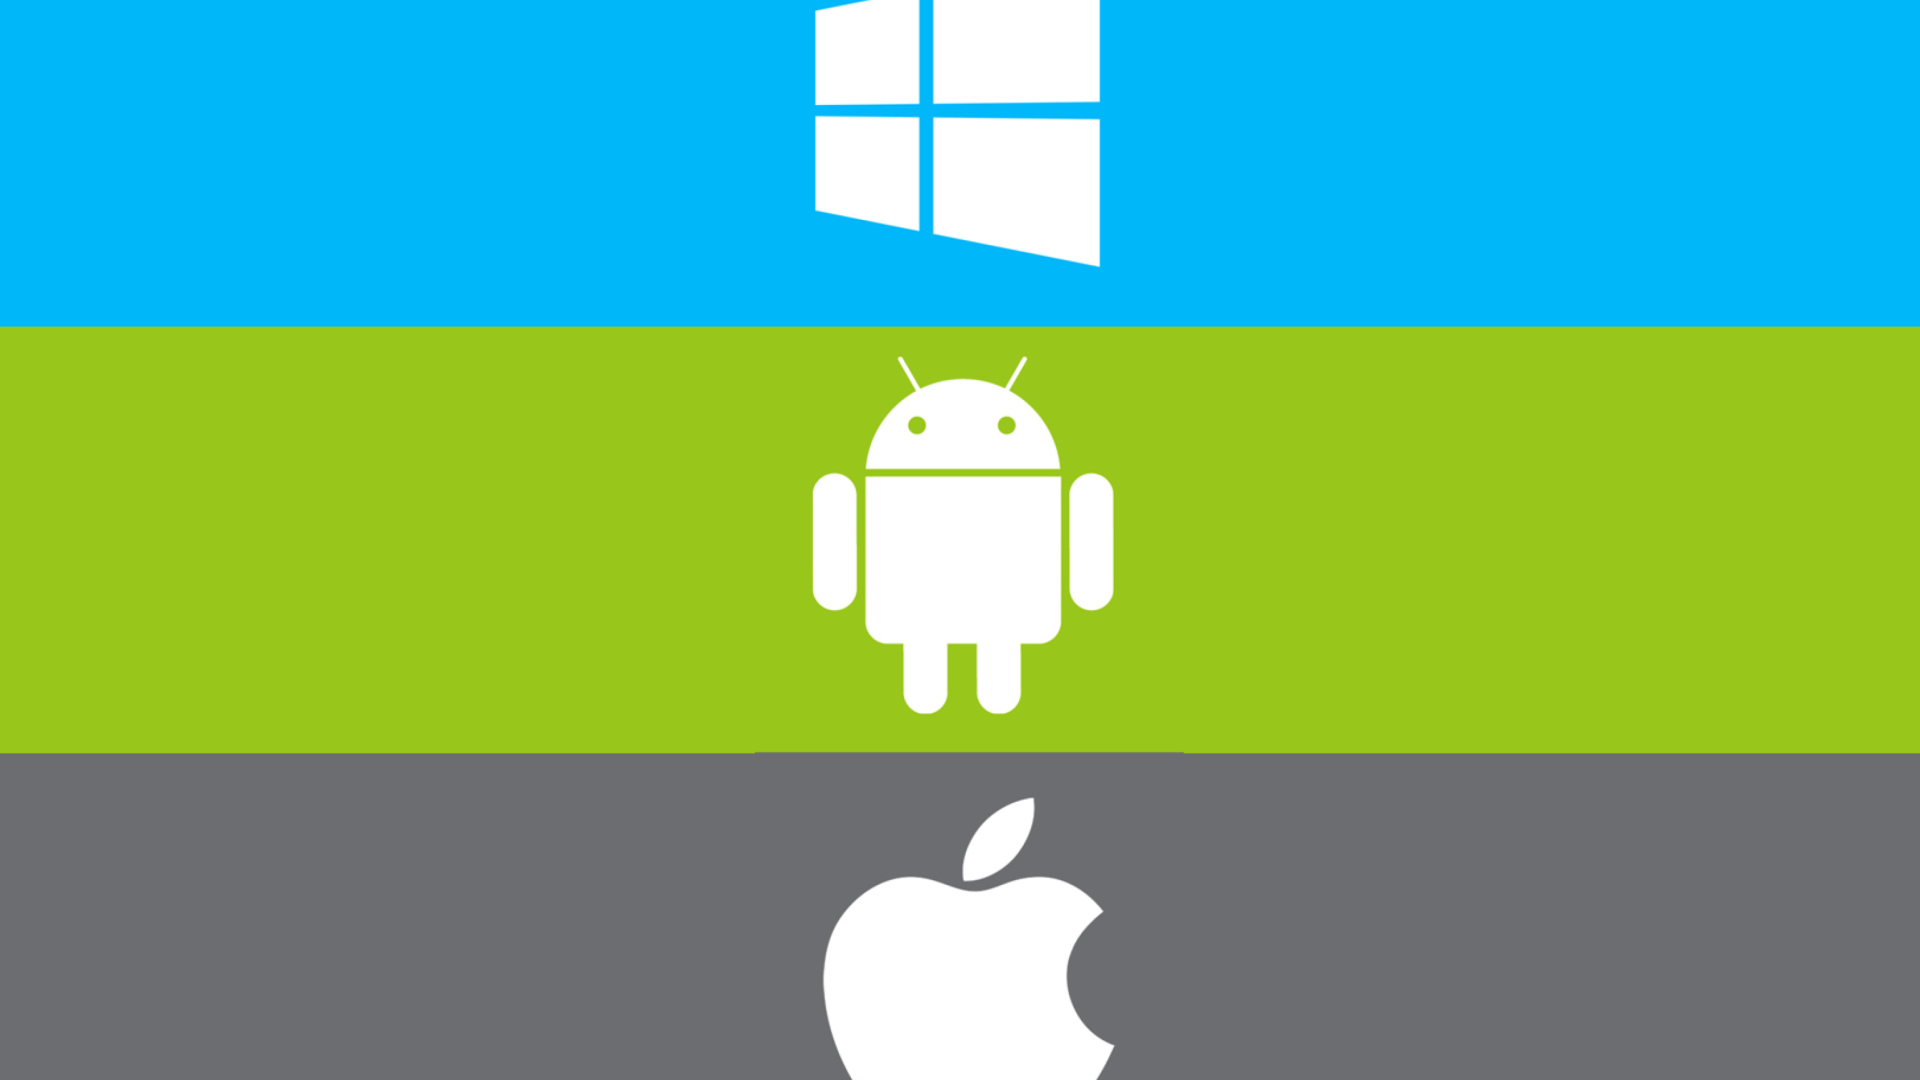 Windows, Apple, Android - What's Your Choice? wallpaper 1920x1080